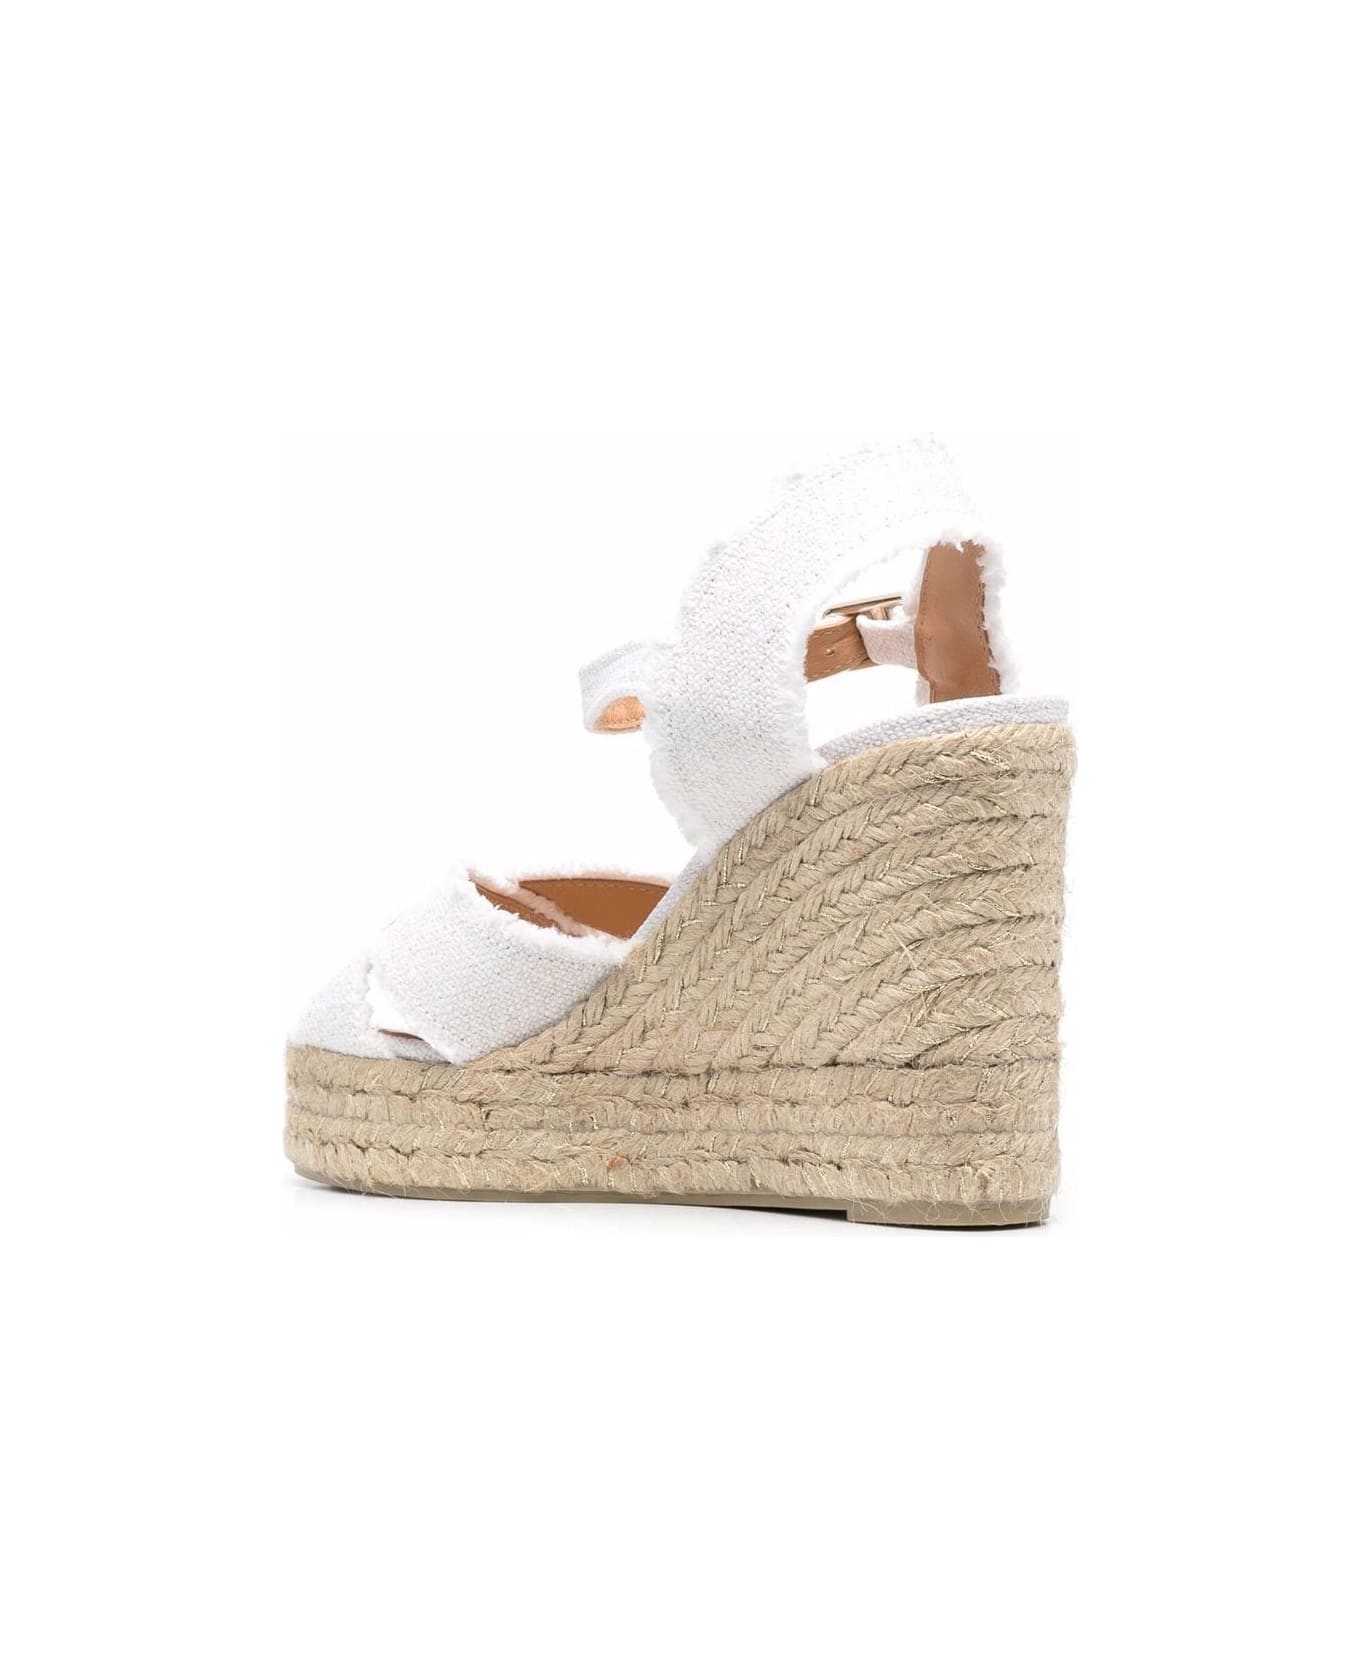 Castañer Bromelia Wedge Espadrille In White Linen With Gold Glitter - Bianco